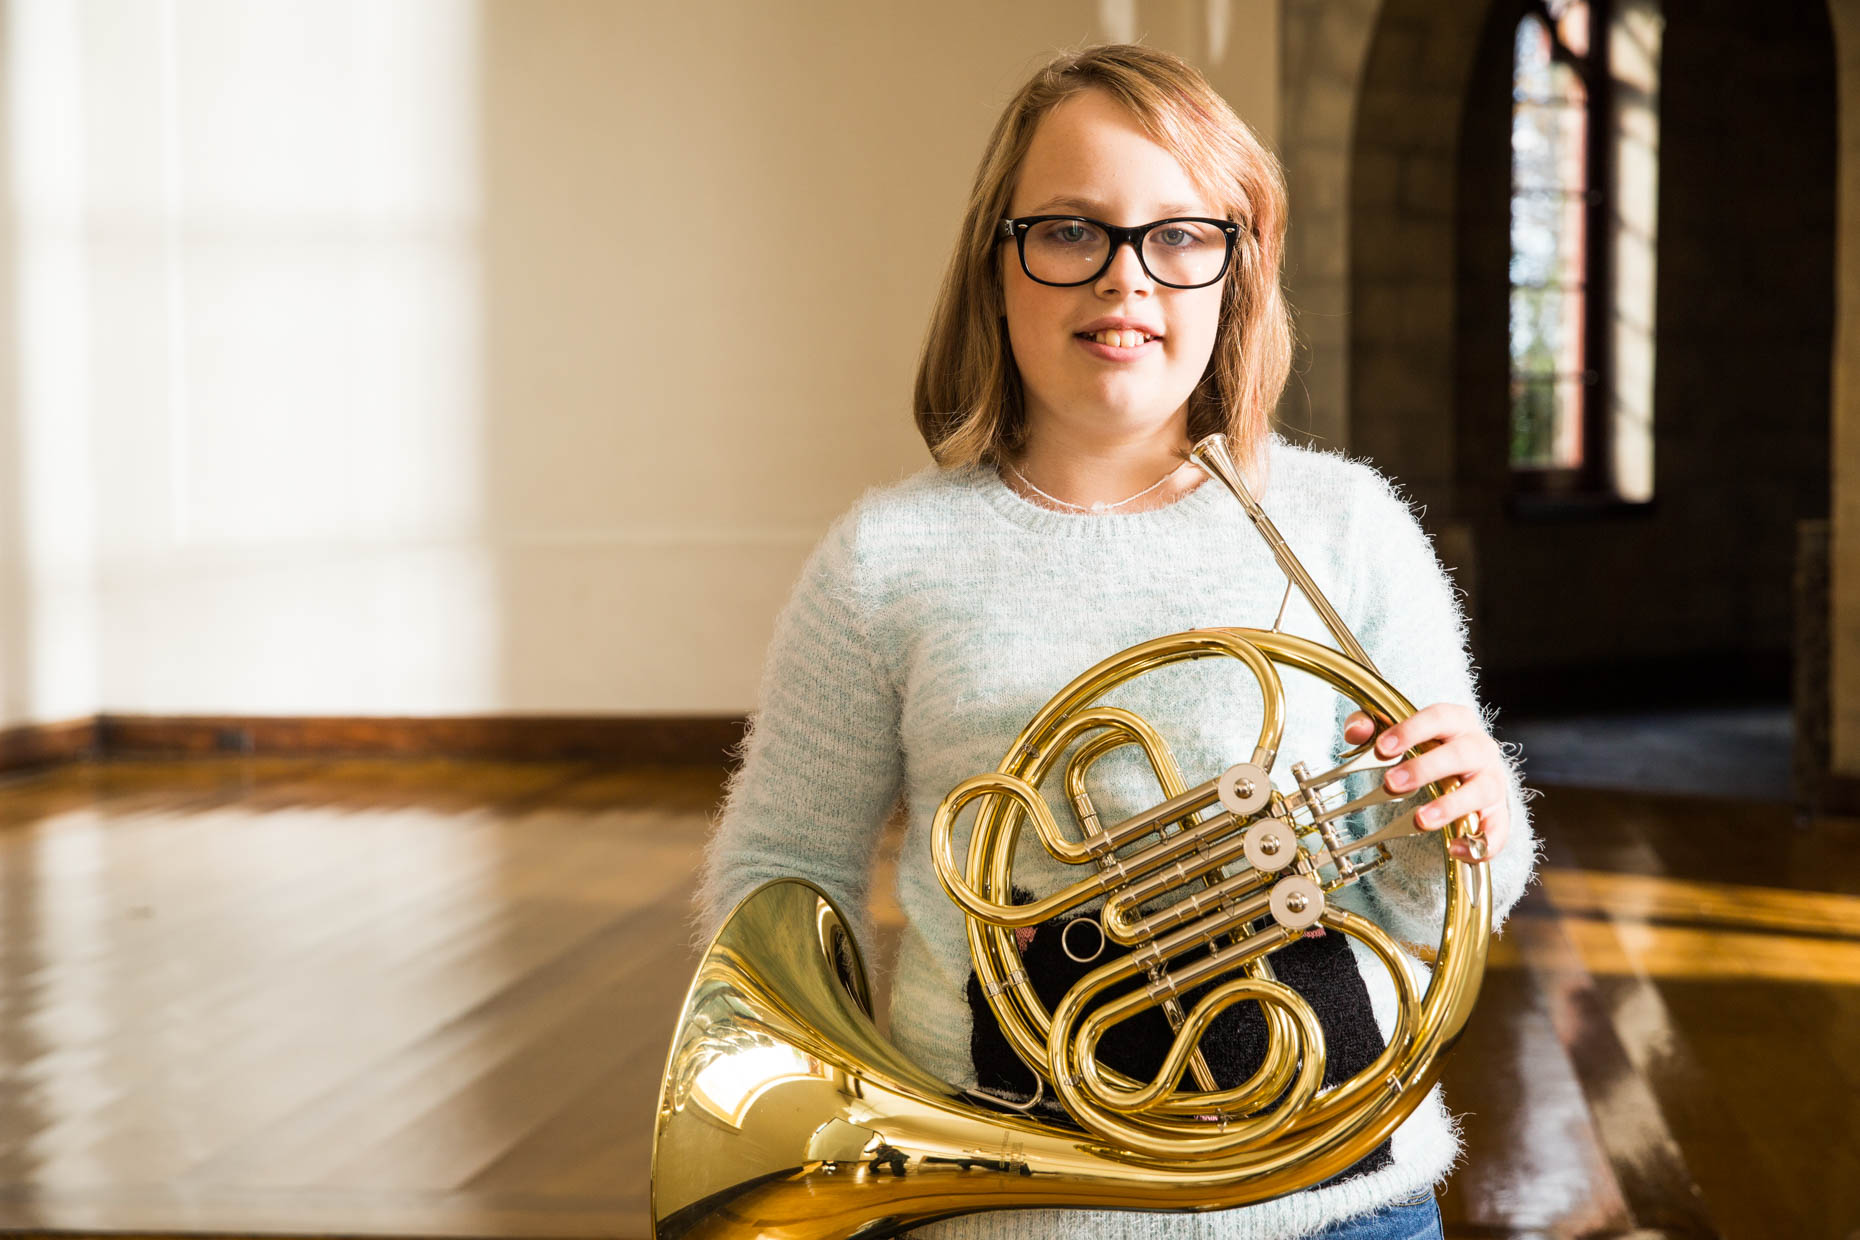 Young girl with glasses holding French Horn.